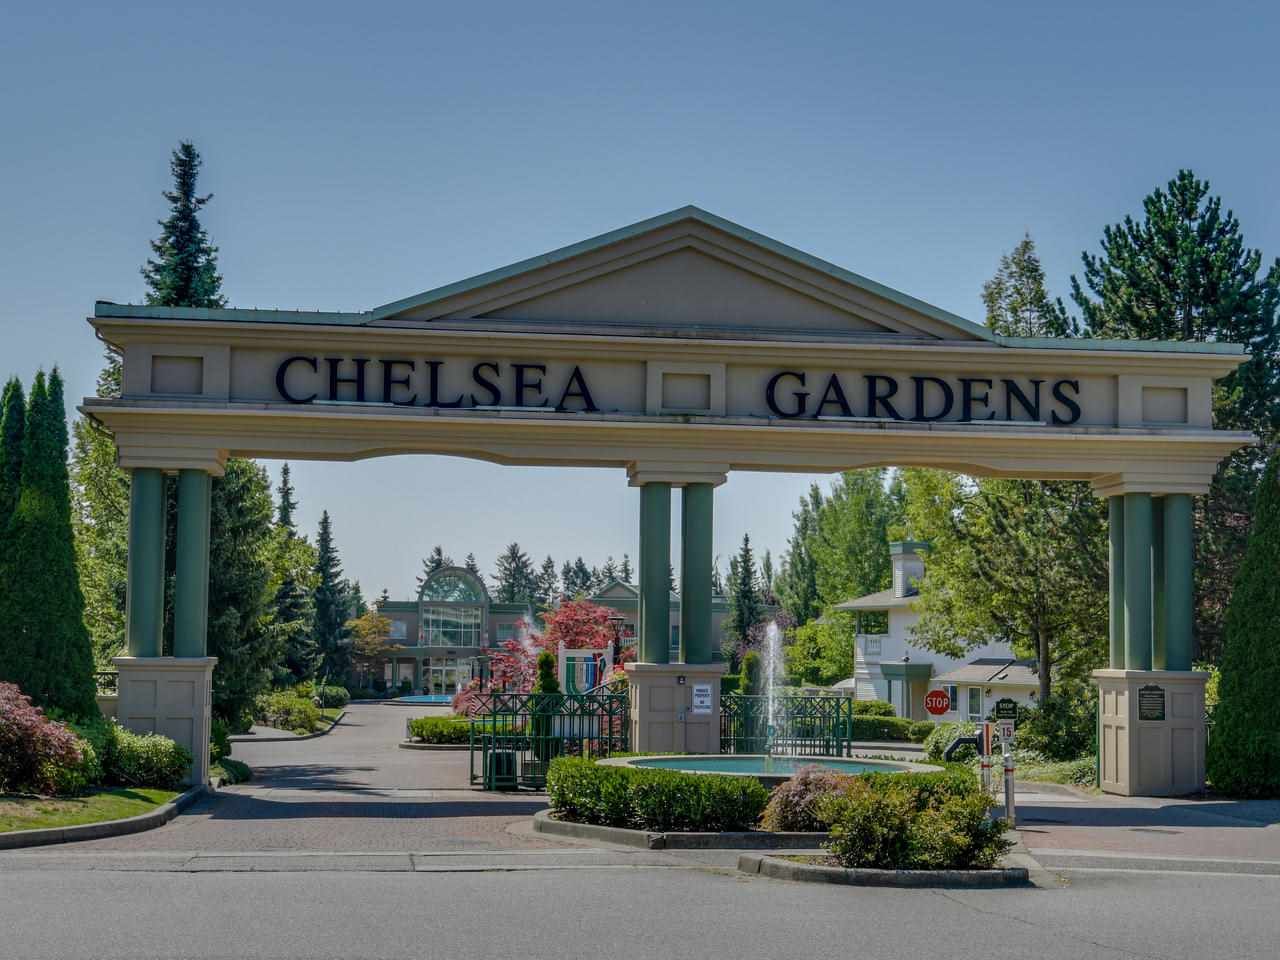 Award Winning Chelsea Gardens! A Gated Community - A Resort Lifestyle for 19+ Adults. Cul-de-Sac entrance with water fountain features.  23 acres of landscaped, manicured gardens, gazebos and common pathways with seating areas